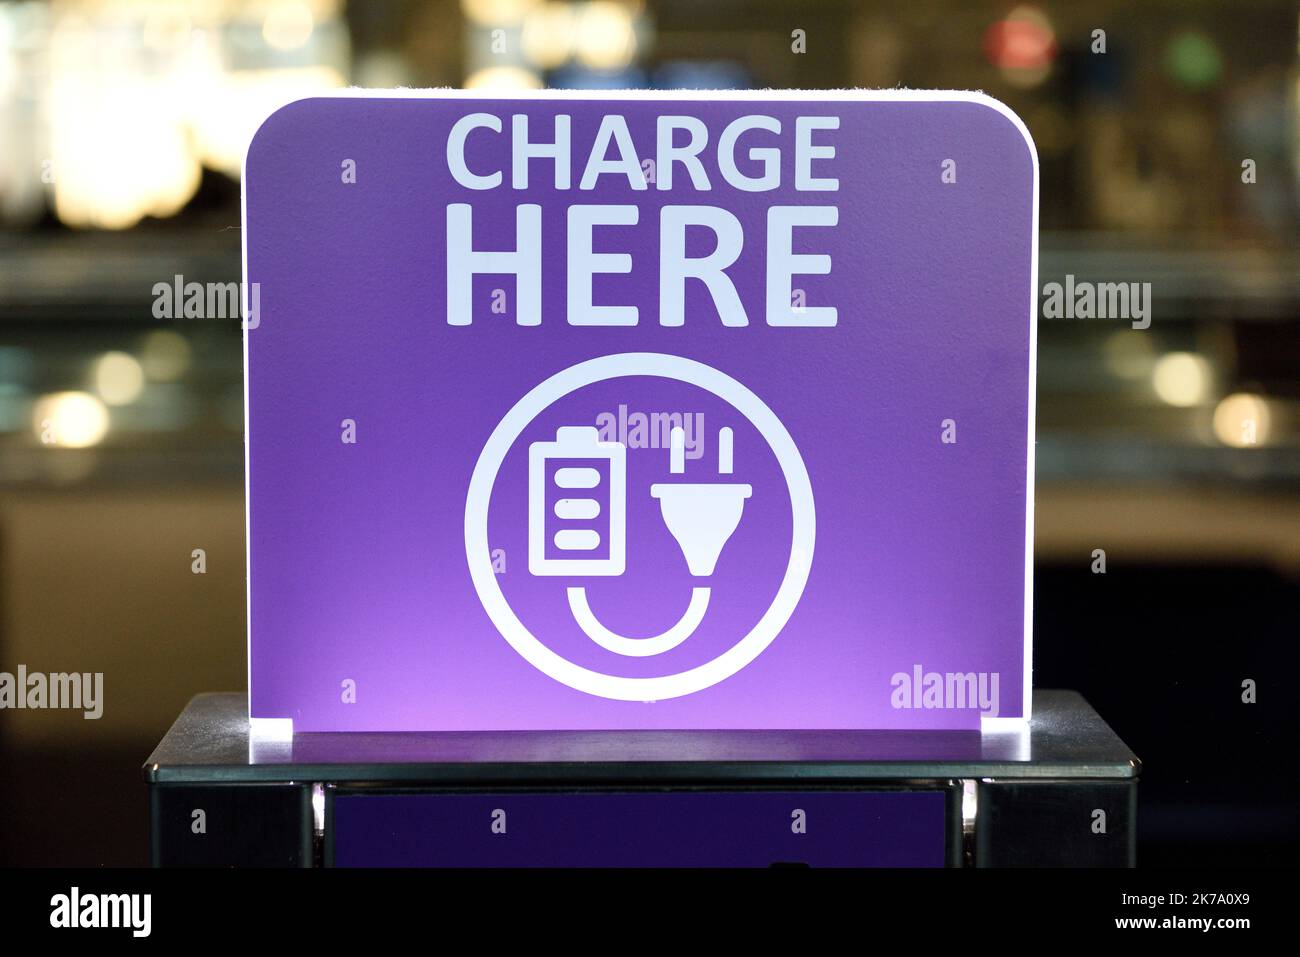 Public electrical charging station, Charge Here sign, device recharging area, power outlets Stock Photo